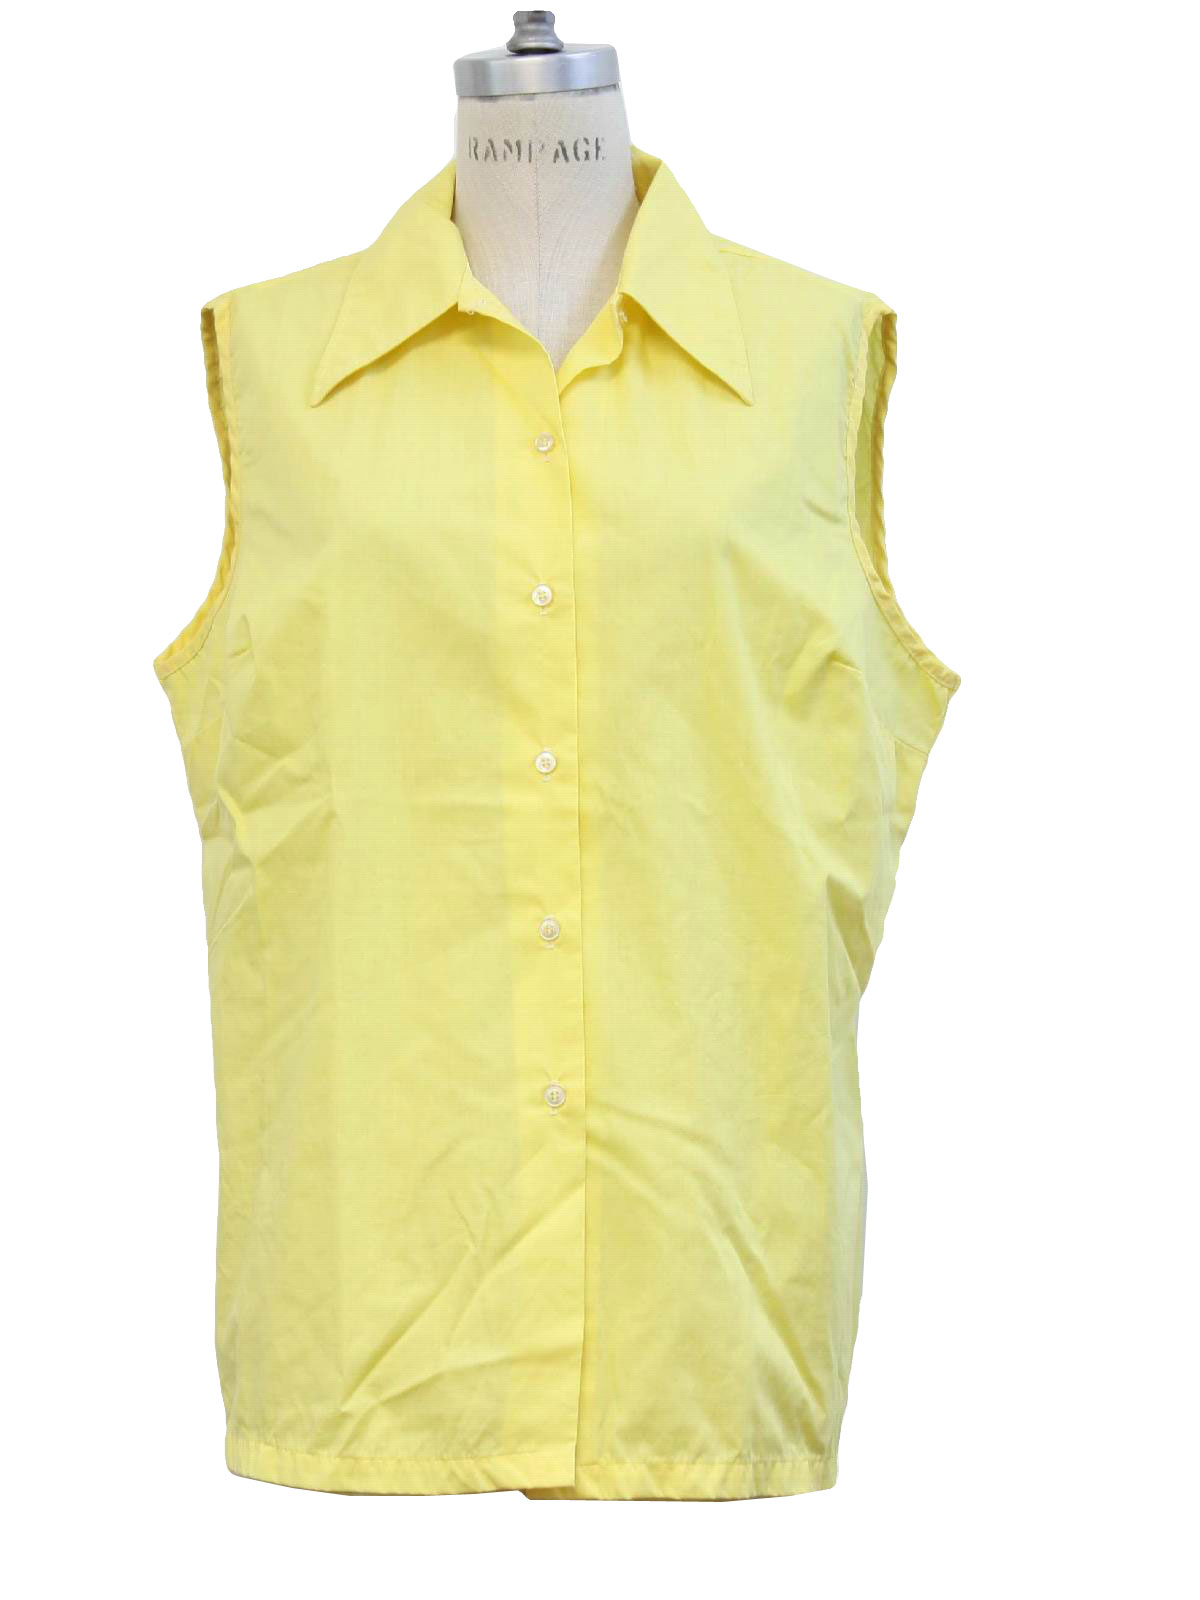 70s Vintage JC Penney Shirt: 70s -JC Penney- Womens sunny yellow cotton ...